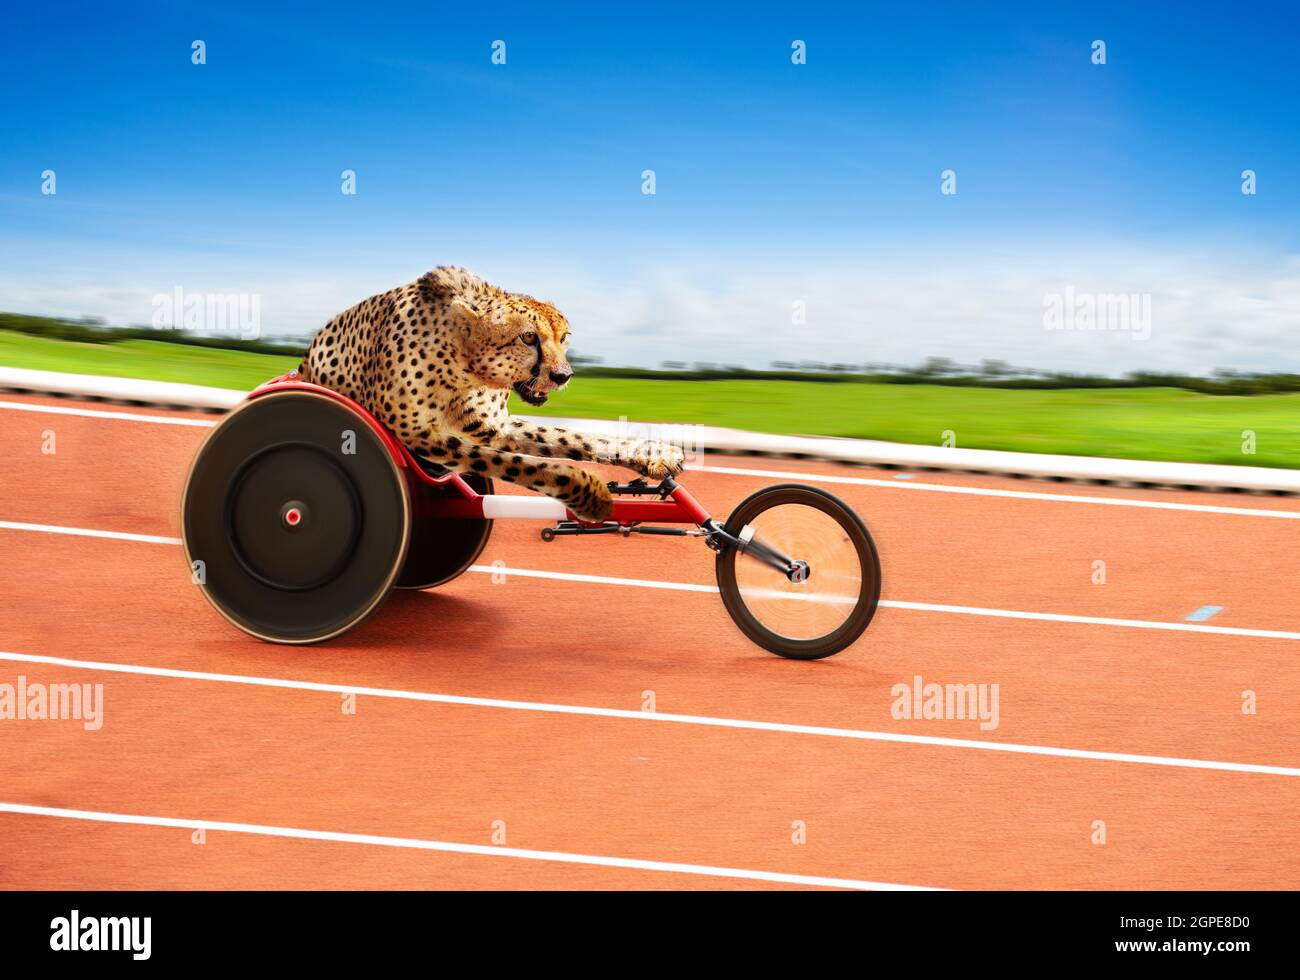 Cheetah disabled sportsman athlete on race track Stock Photo